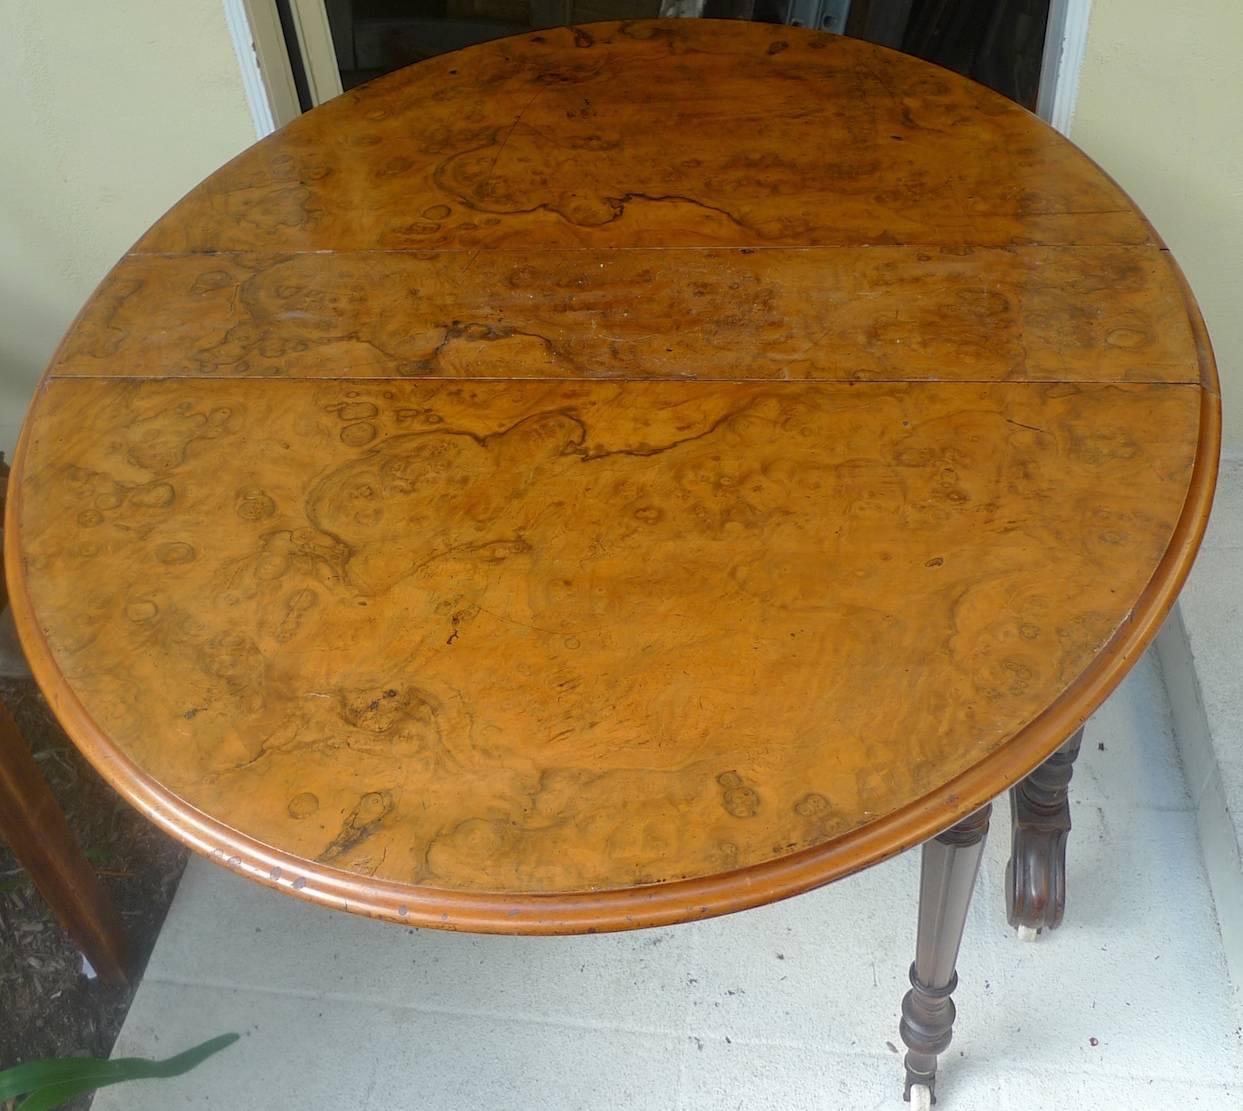 Stained English 19th Century Burl Walnut Top, Drop-Leaf Table with Carved Legs on Wheels